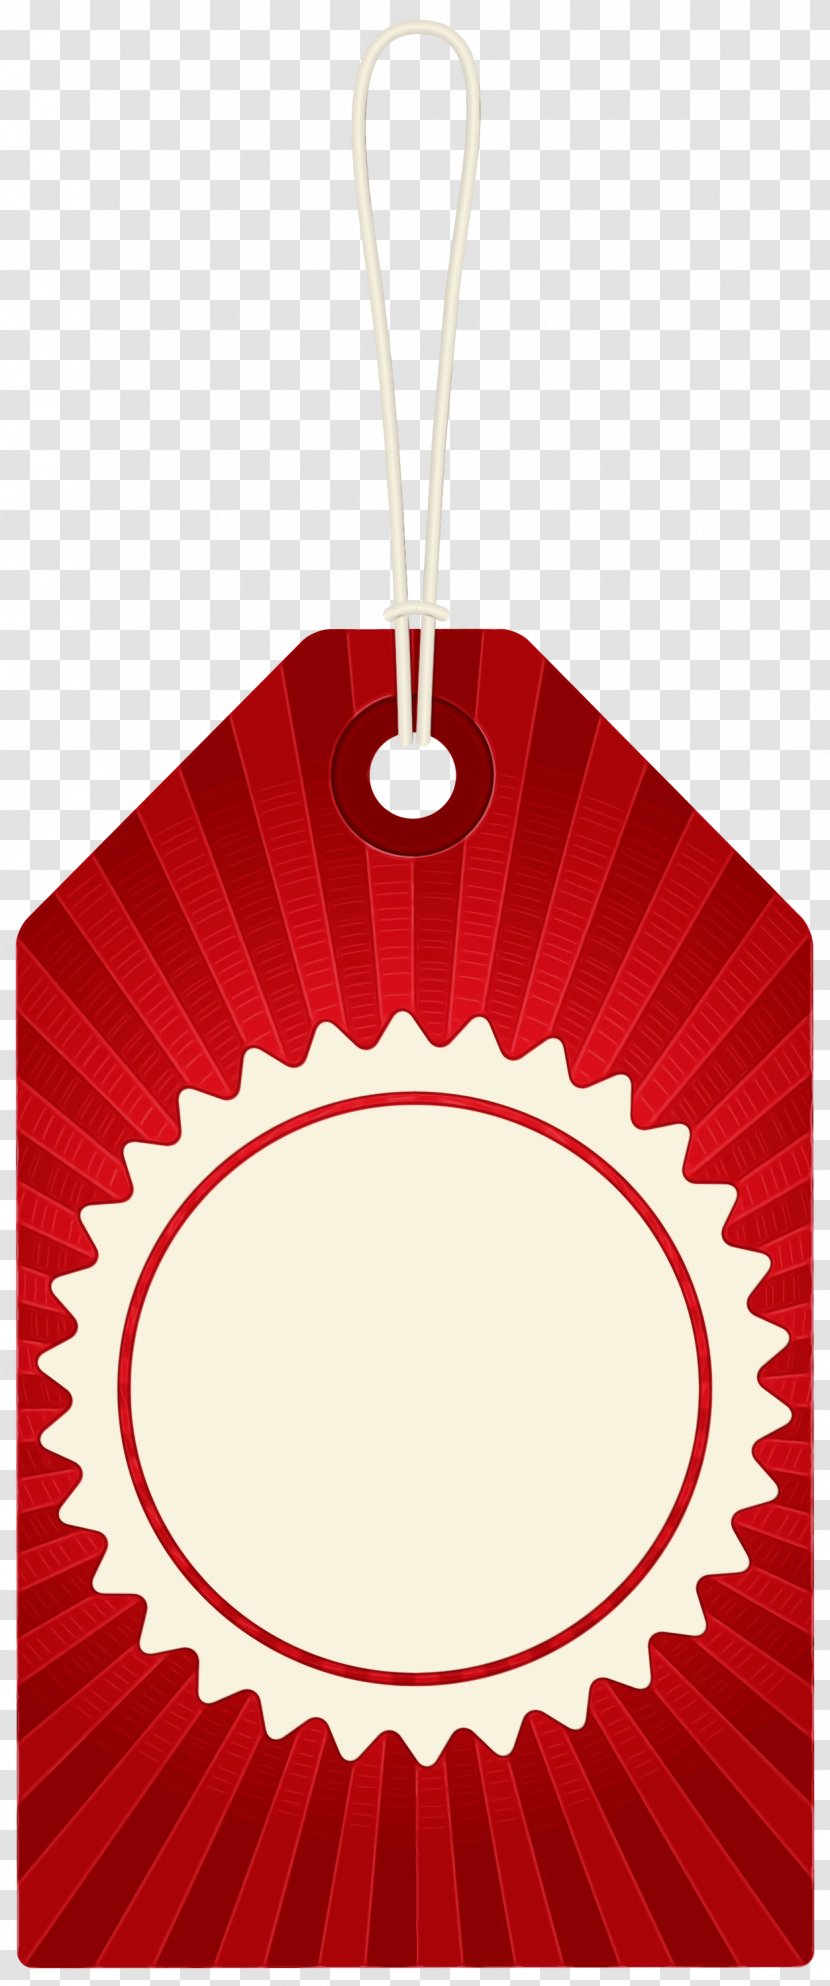 Swimming Cartoon - Ornament Red Transparent PNG